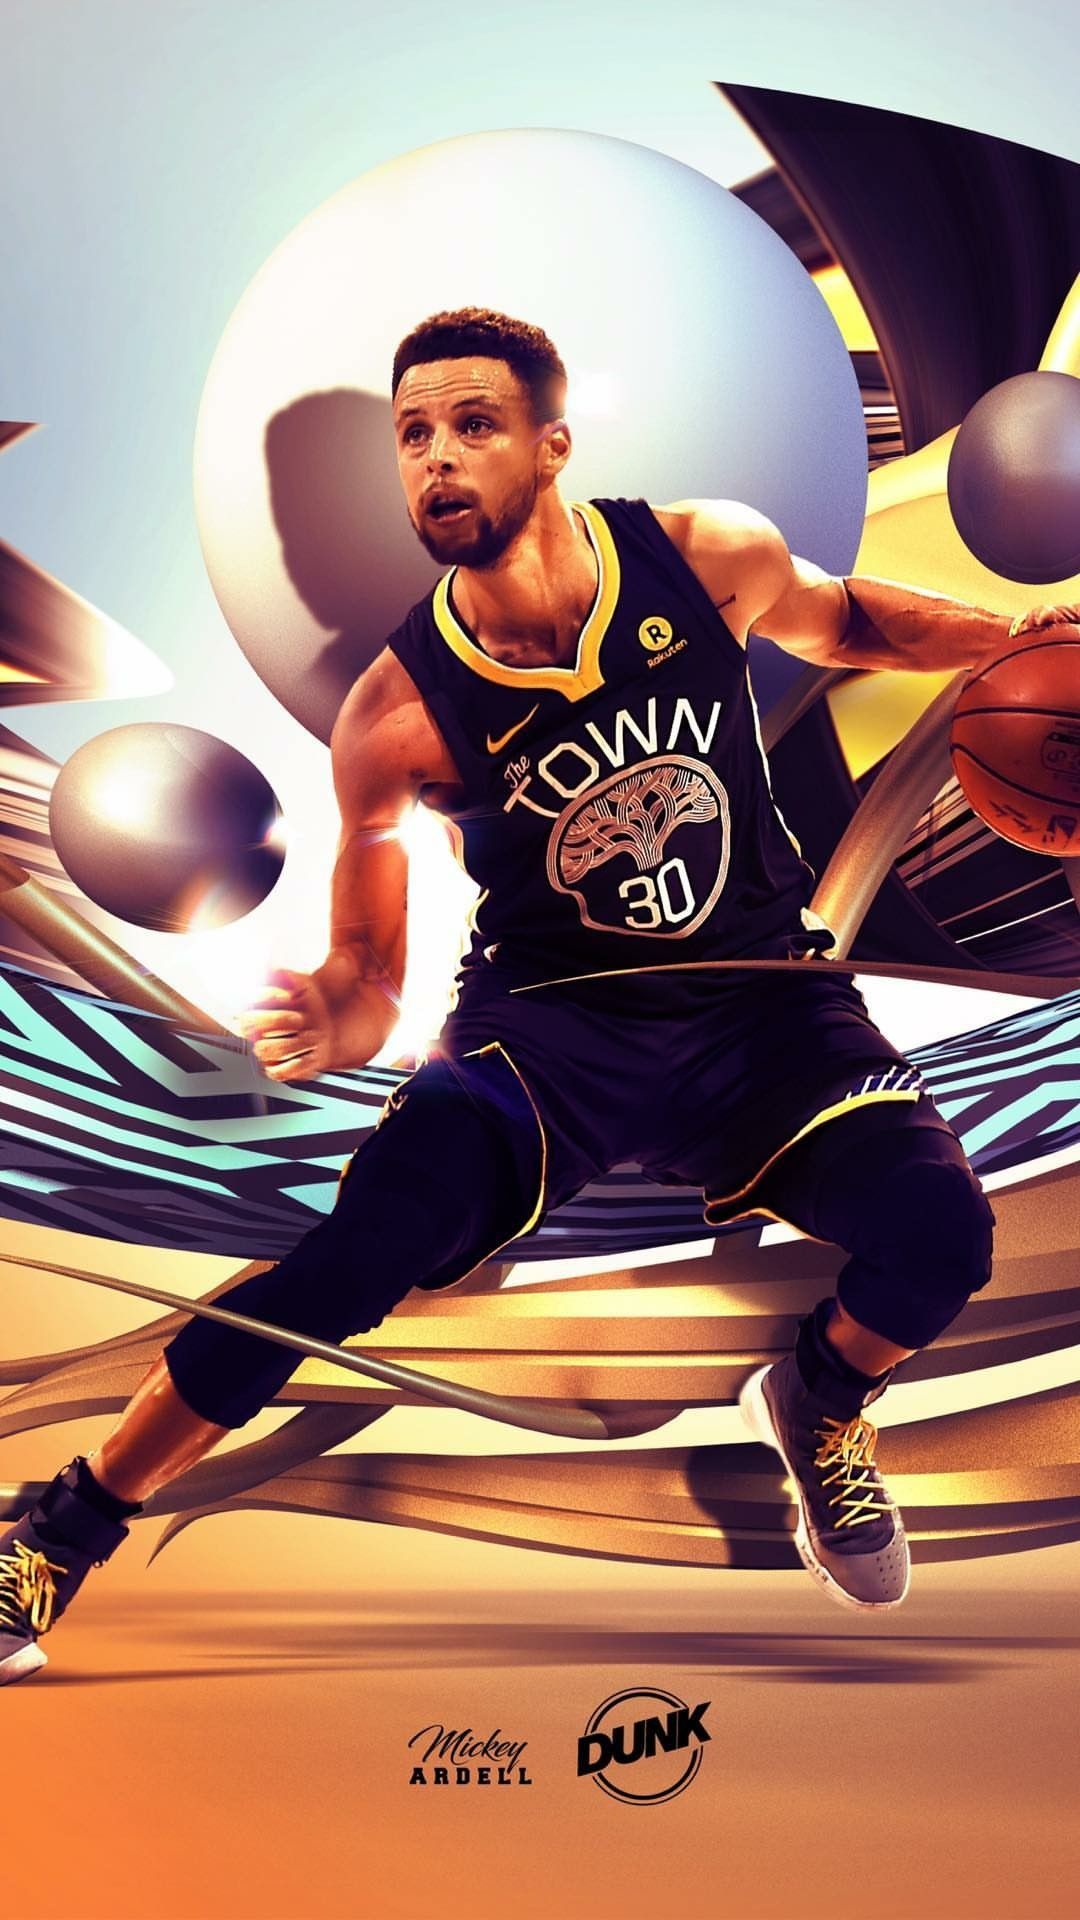 Wallpaper Of Stephen Curry